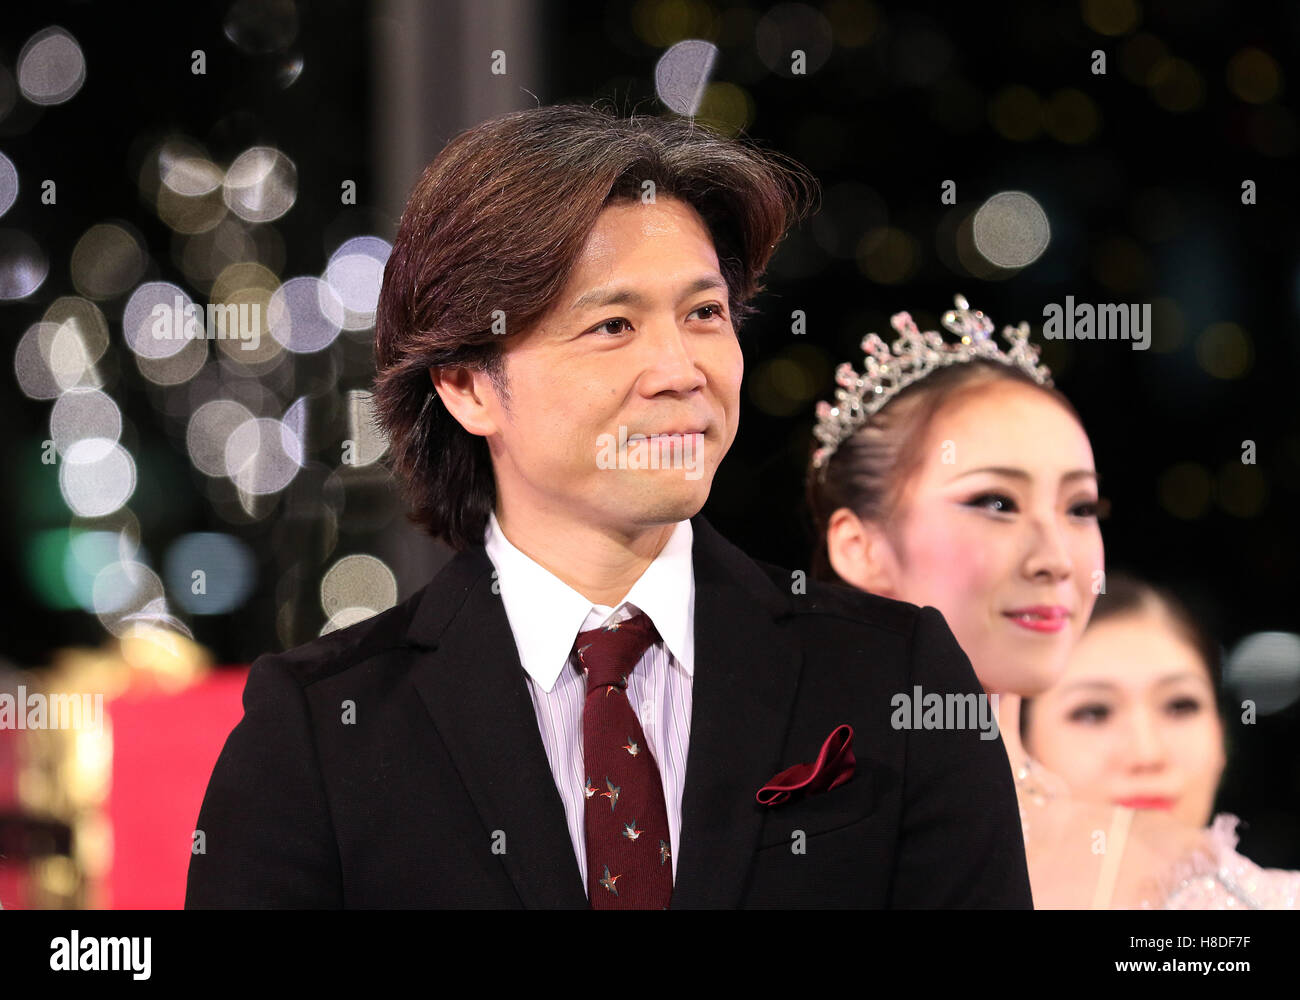 Tokyo, Japan. 10th Nov, 2016. Tetsuya Kumakawa, Japanese ballet dancer and director of the K Ballet Company attends the light-up ceremony of a large Christmas tree at the Marunouchi building in Tokyo on Thursday, November 10, 2016. The Marunouchi area started illumination and decoration with motif of ballet dance Tchaikovsky's 'Nutcracker' through the Christmas Day. © Yoshio Tsunoda/AFLO/Alamy Live News Stock Photo